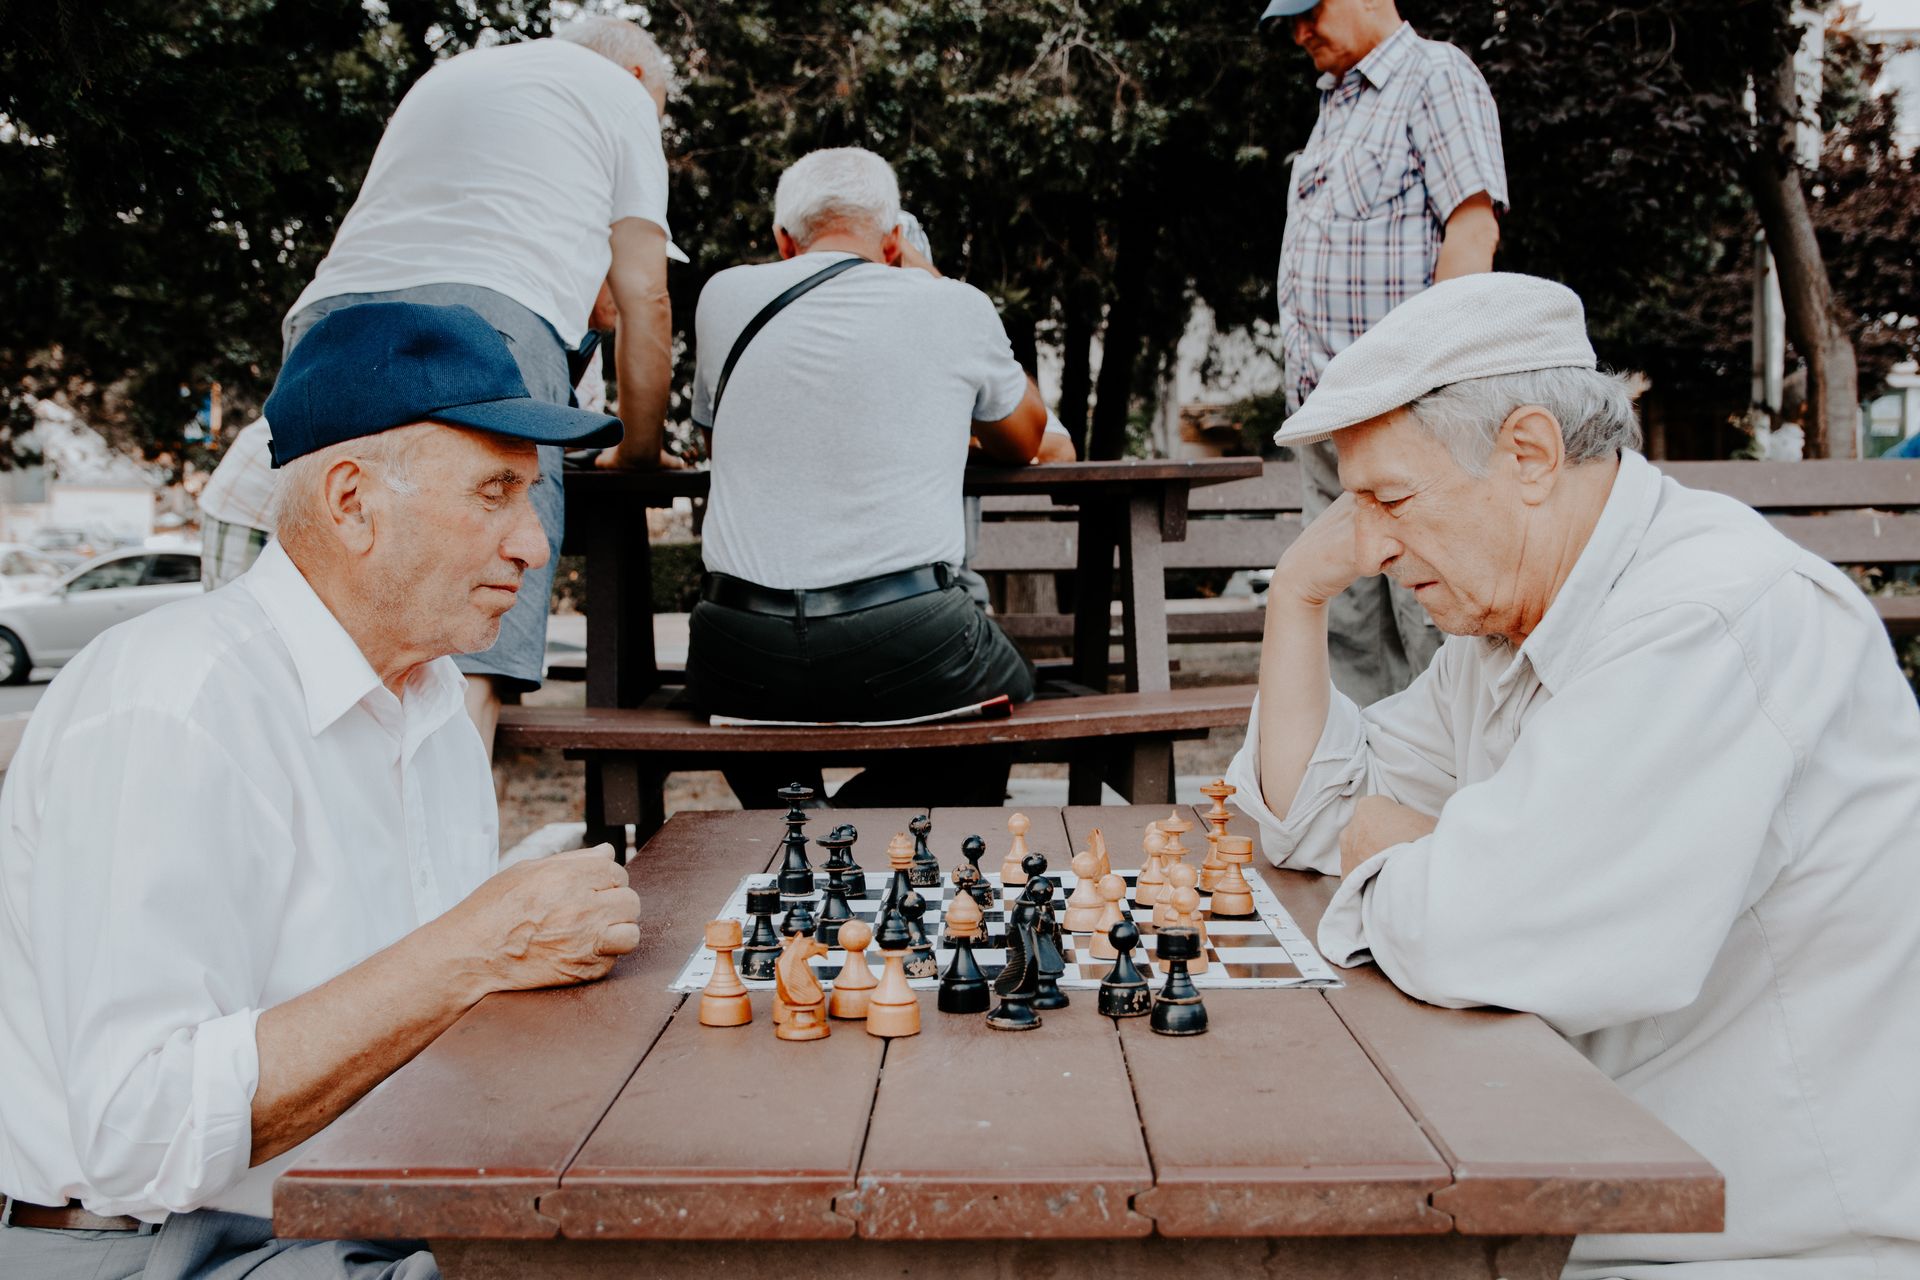 two men are playing a game of chess on a wooden table